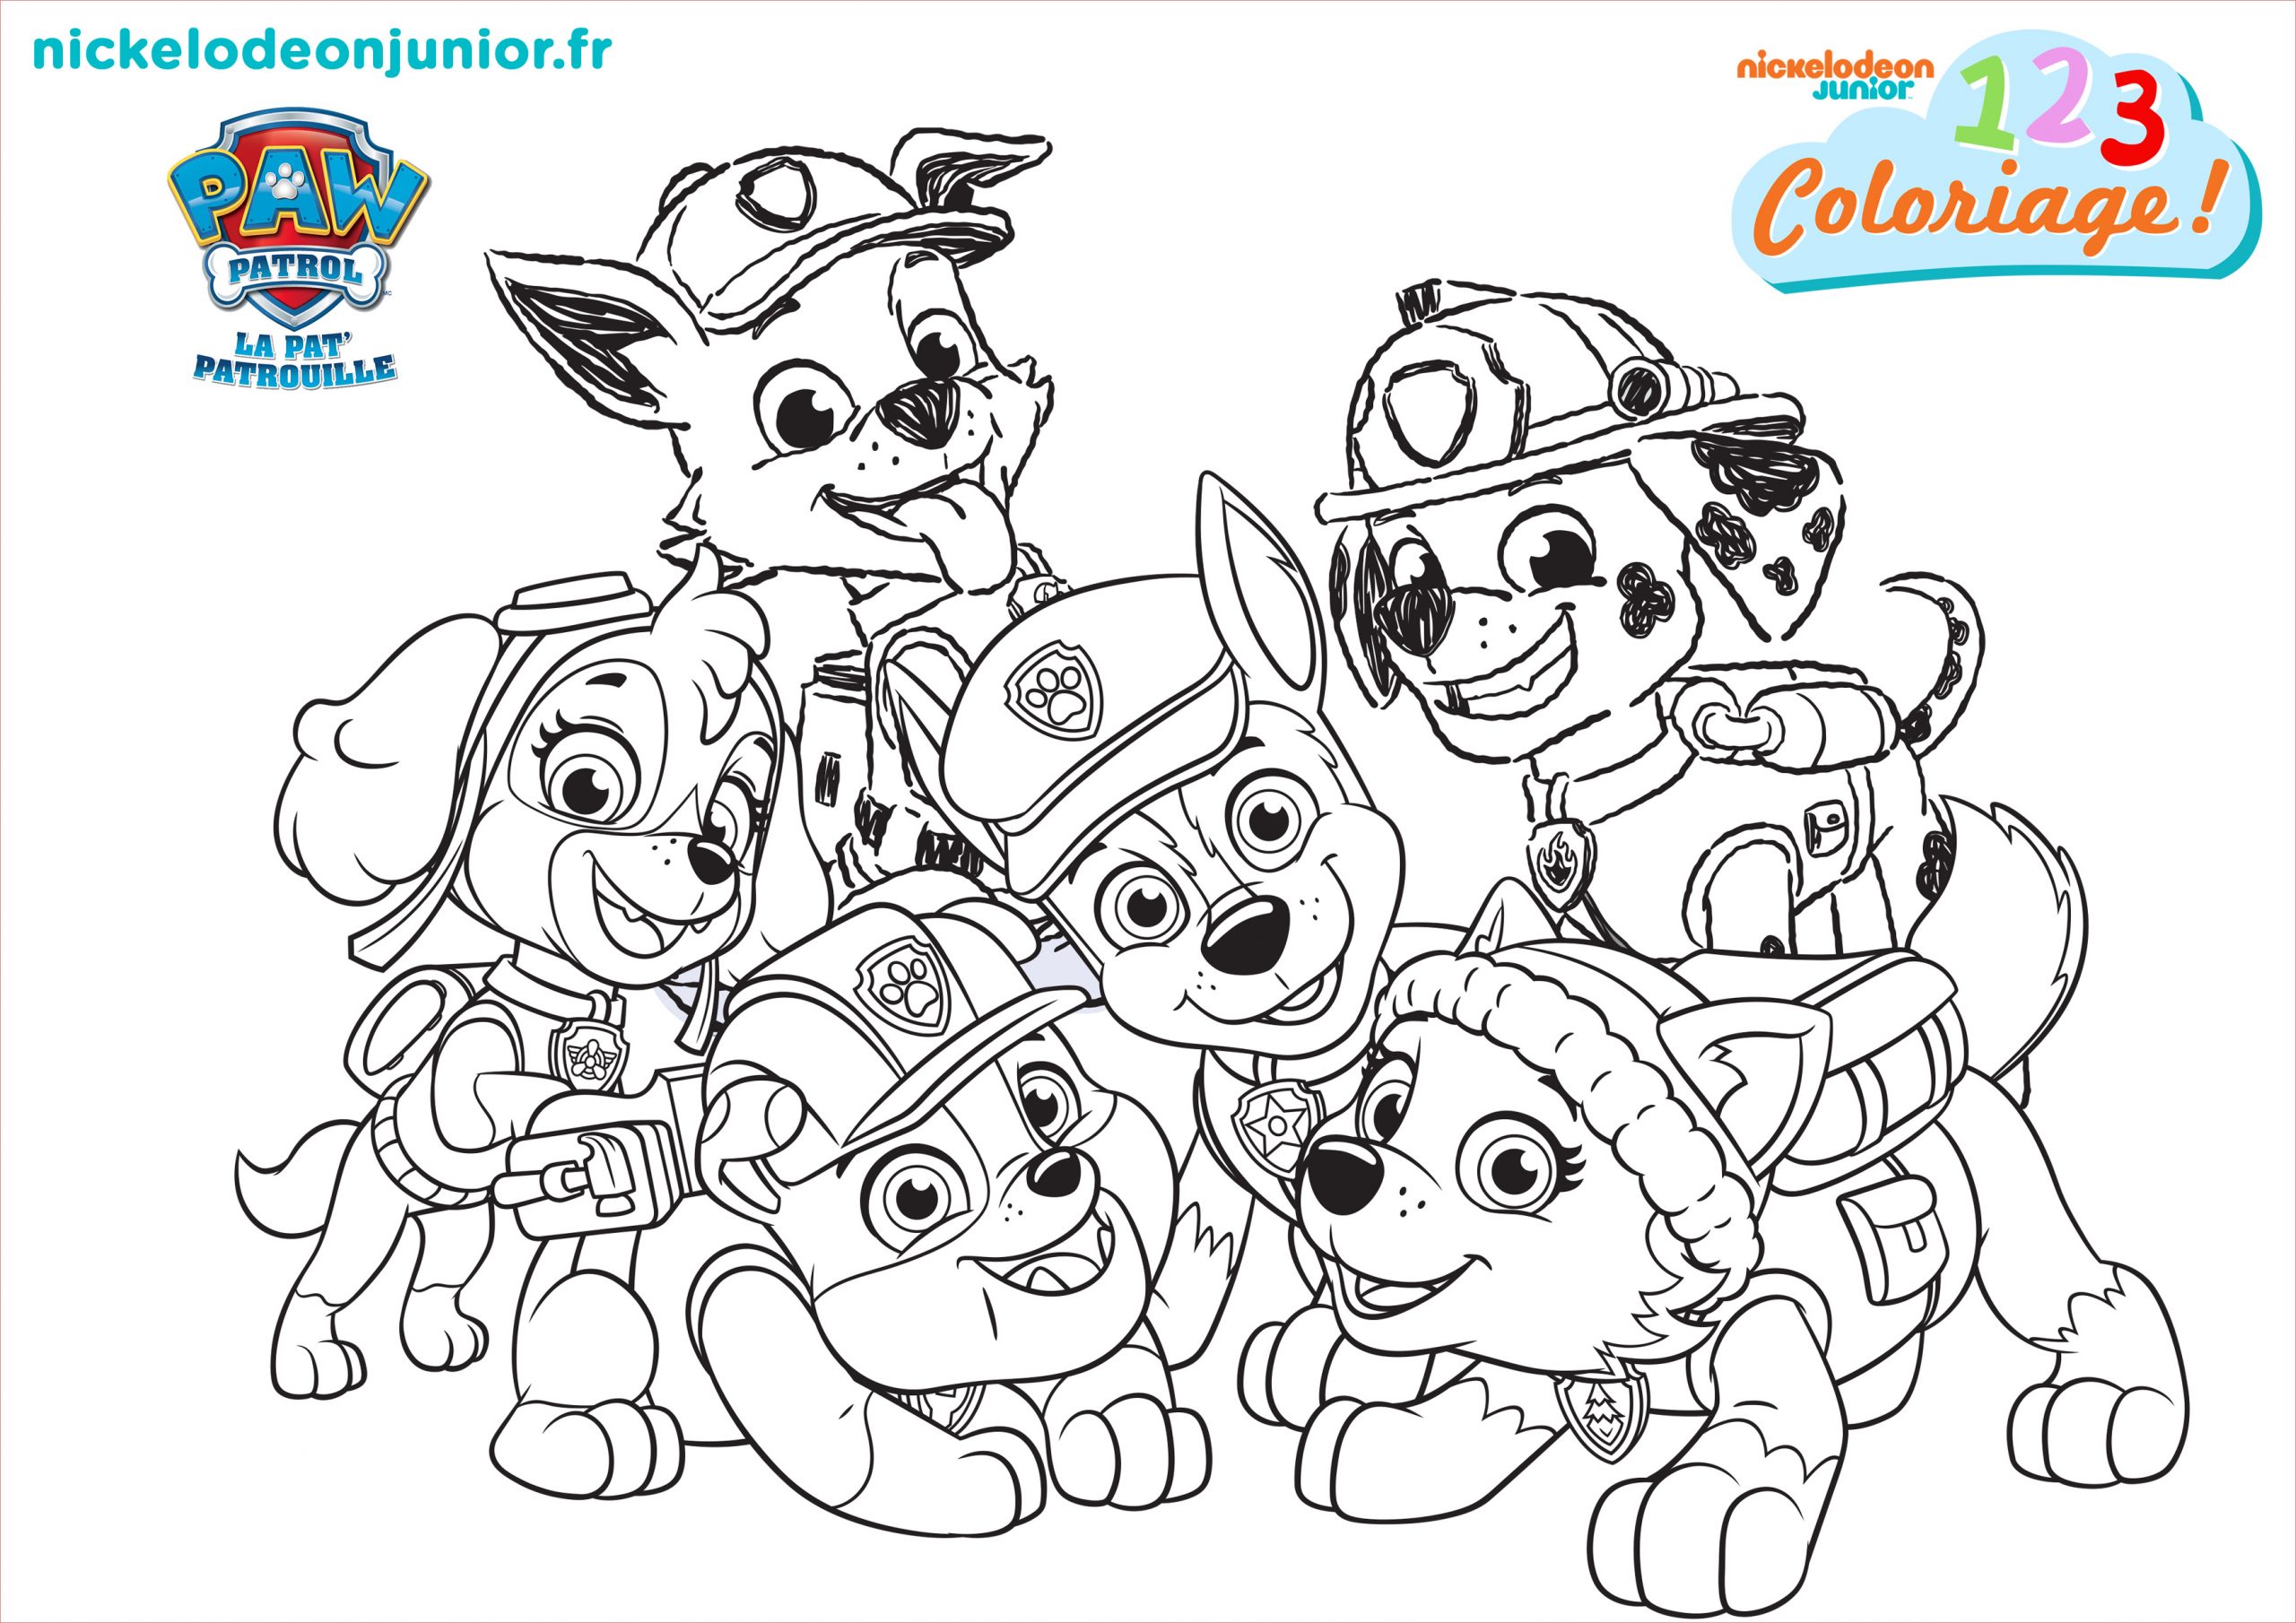 coloriages paw patrol8